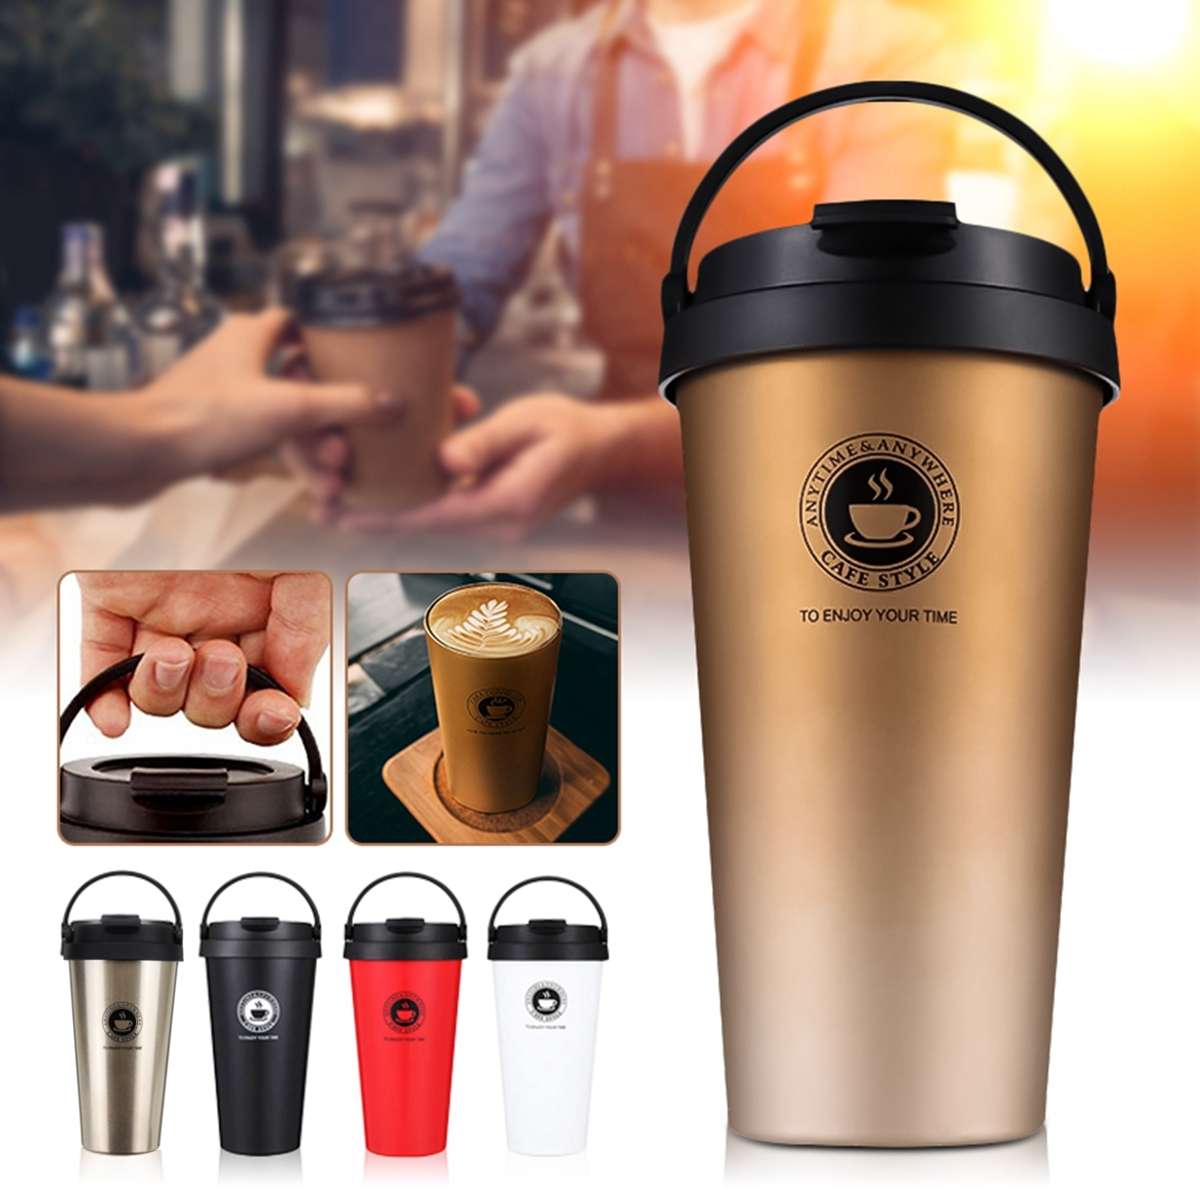 500 Ml Draagbare Reizen Koffie Mok Thermoskan Thermo Fles Water Auto Mok Thermocup Roestvrijstalen Thermosflessen Tumbler Cup